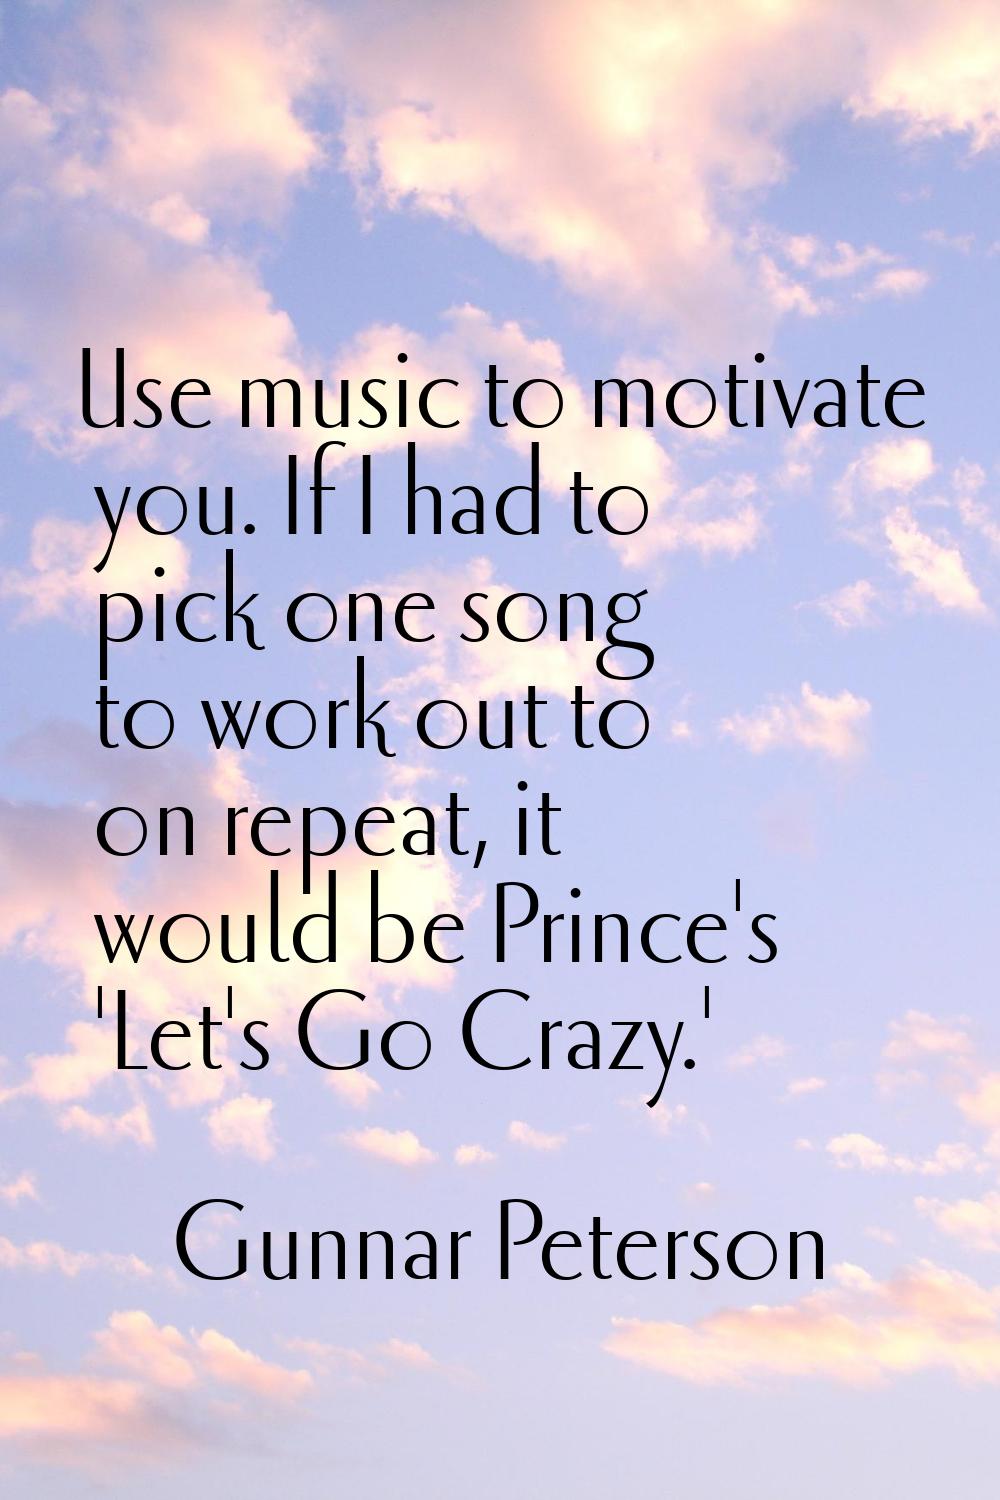 Use music to motivate you. If I had to pick one song to work out to on repeat, it would be Prince's